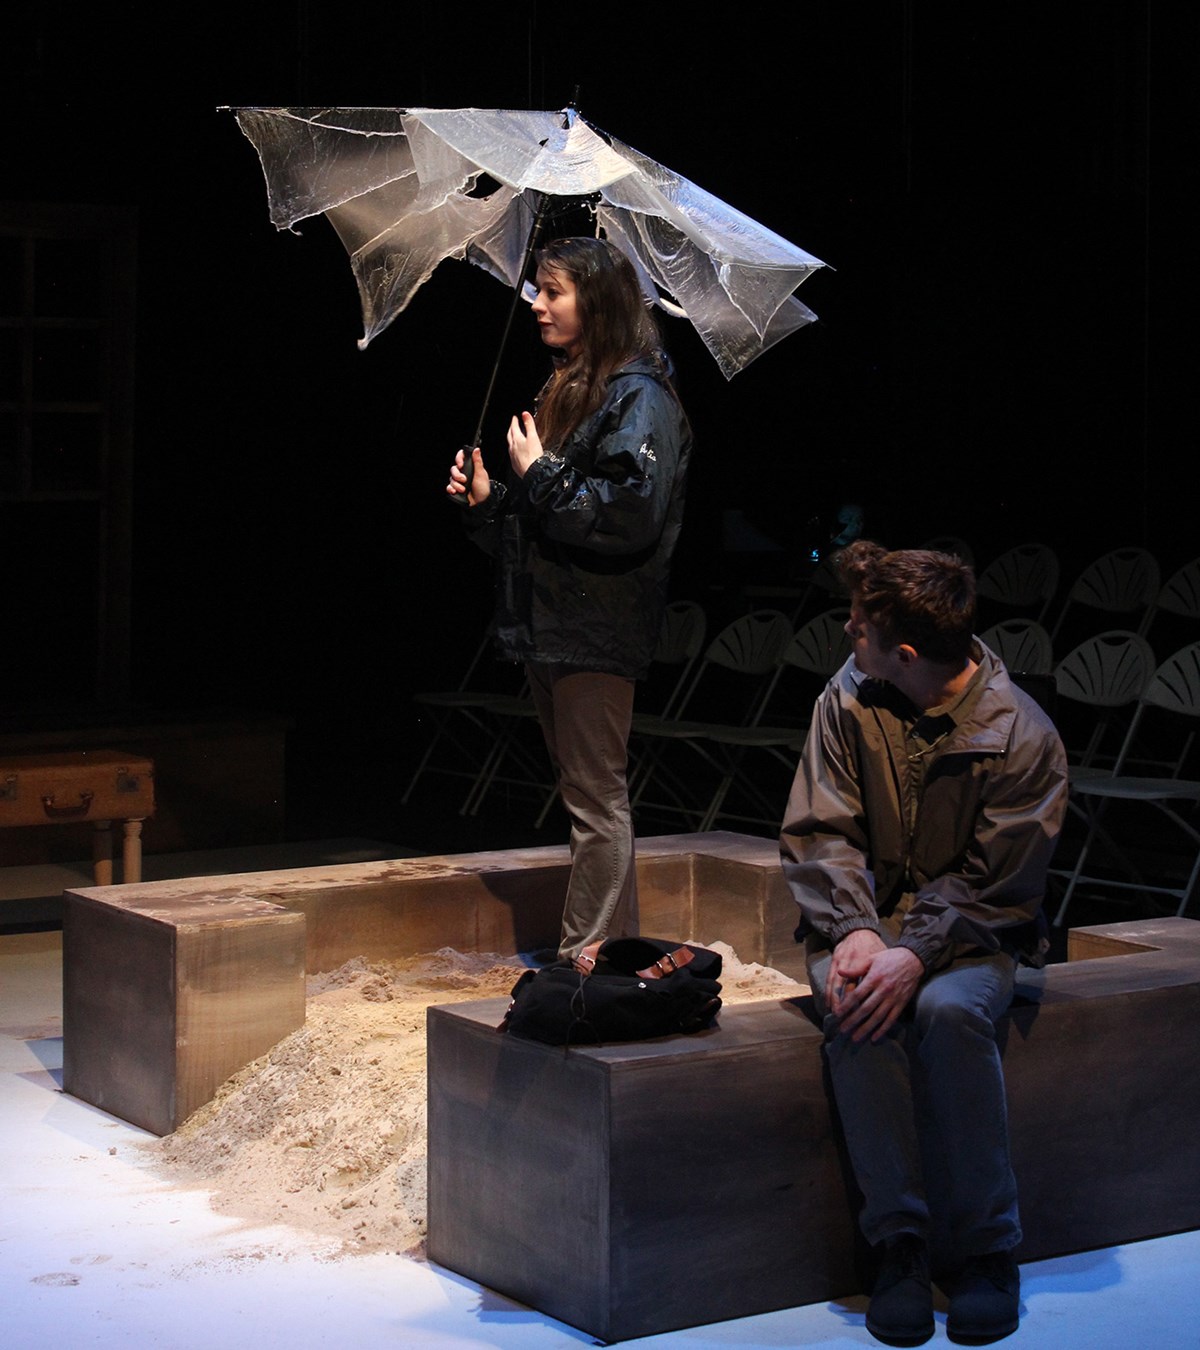 A female holding an umbrella on stage while a male student looks on during a UMass Lowell Theatre Arts production.